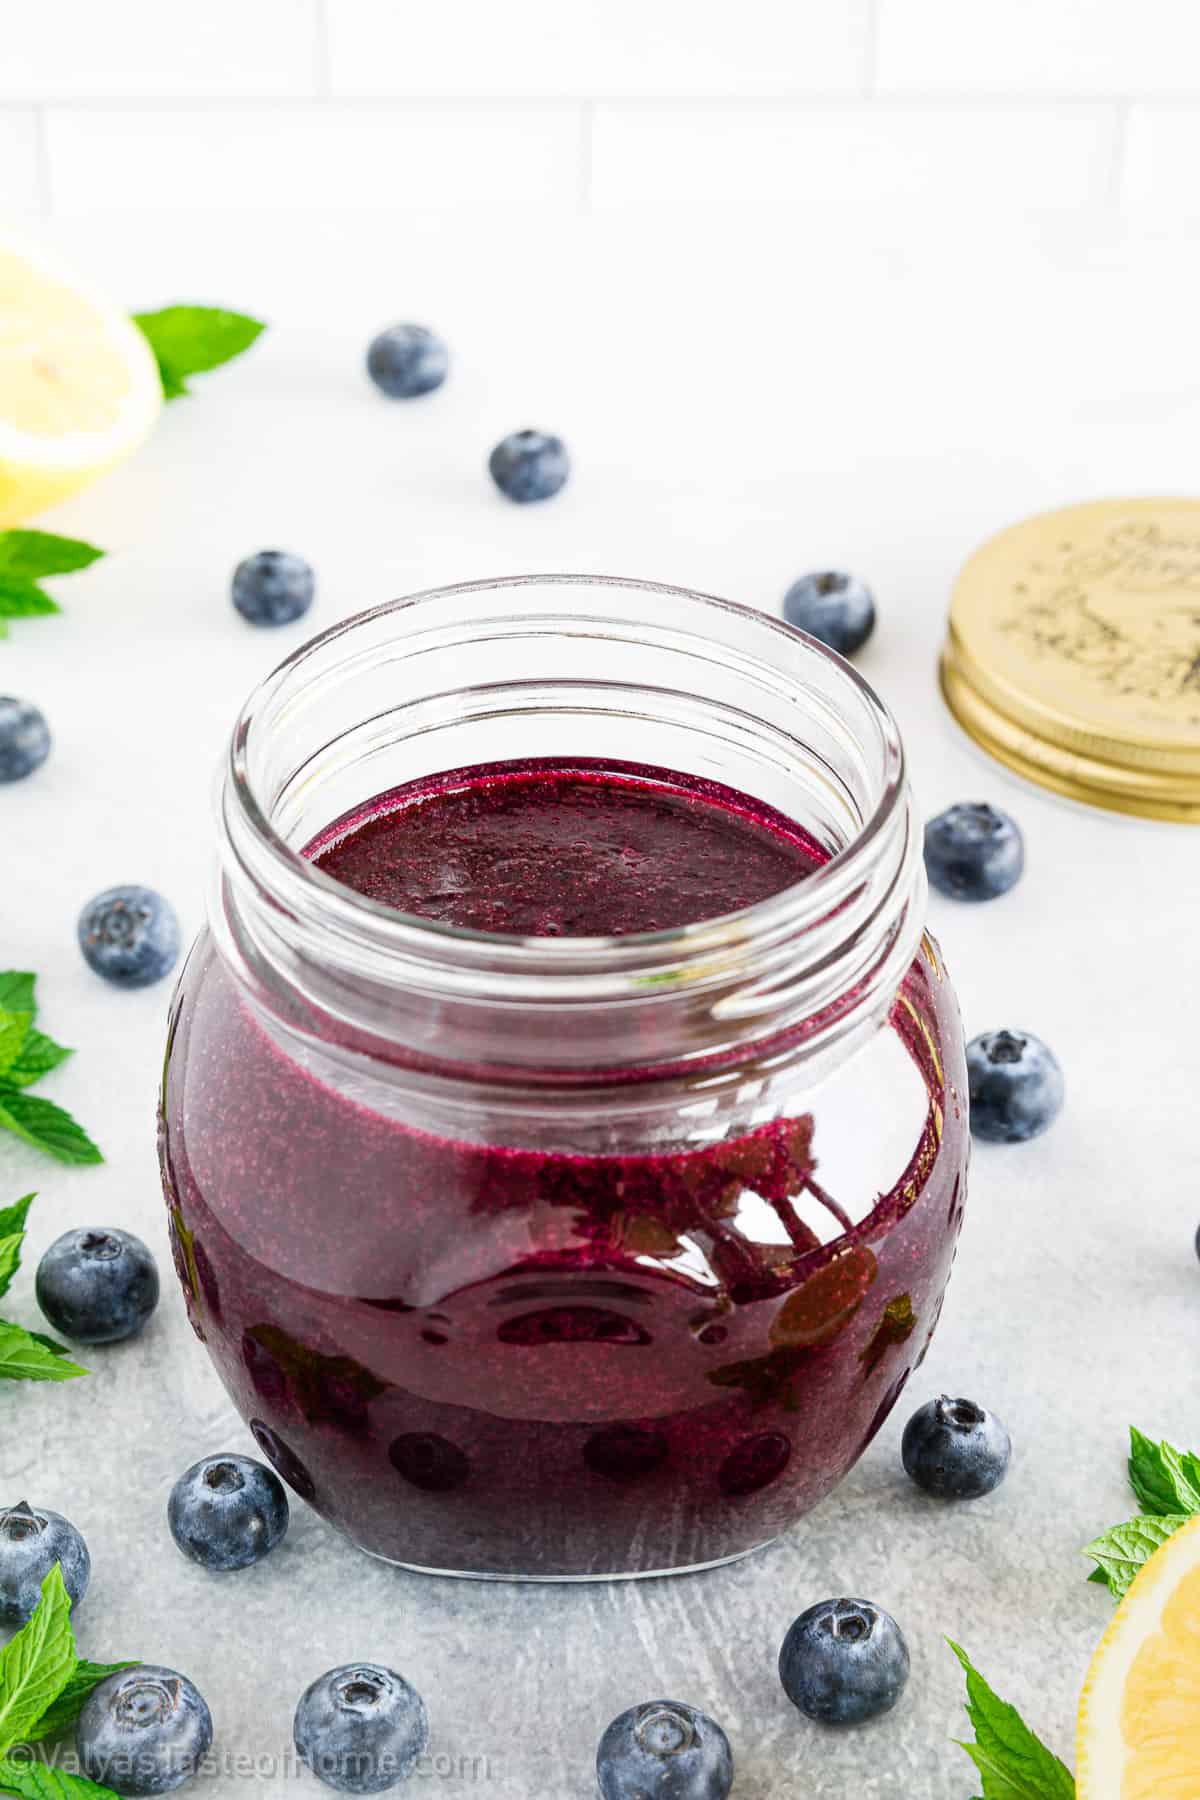 This Blueberry Coulis recipe will give you the tastiest blueberry sauce you've ever had that's incredibly versatile and tastes absolutely delicious!